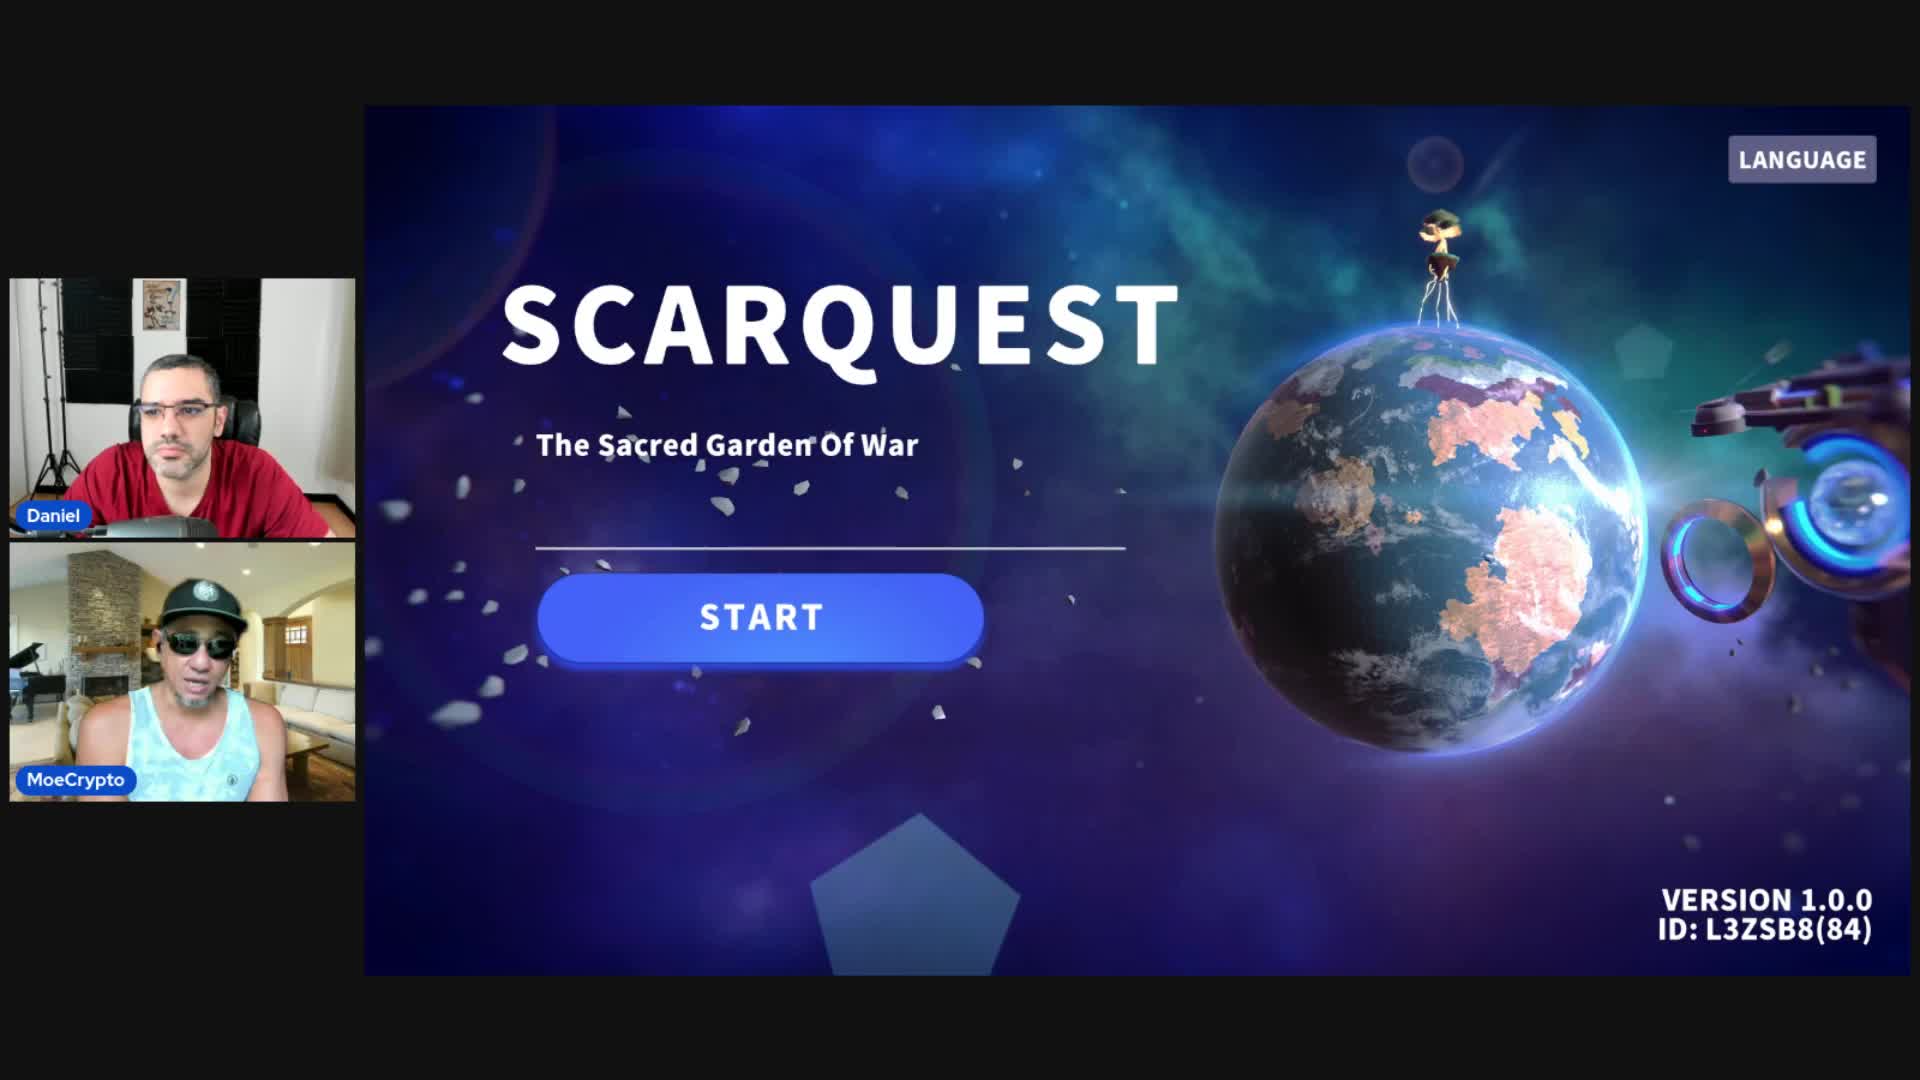 ScarQuest: Master this Crypto Game and Earn Money FAST